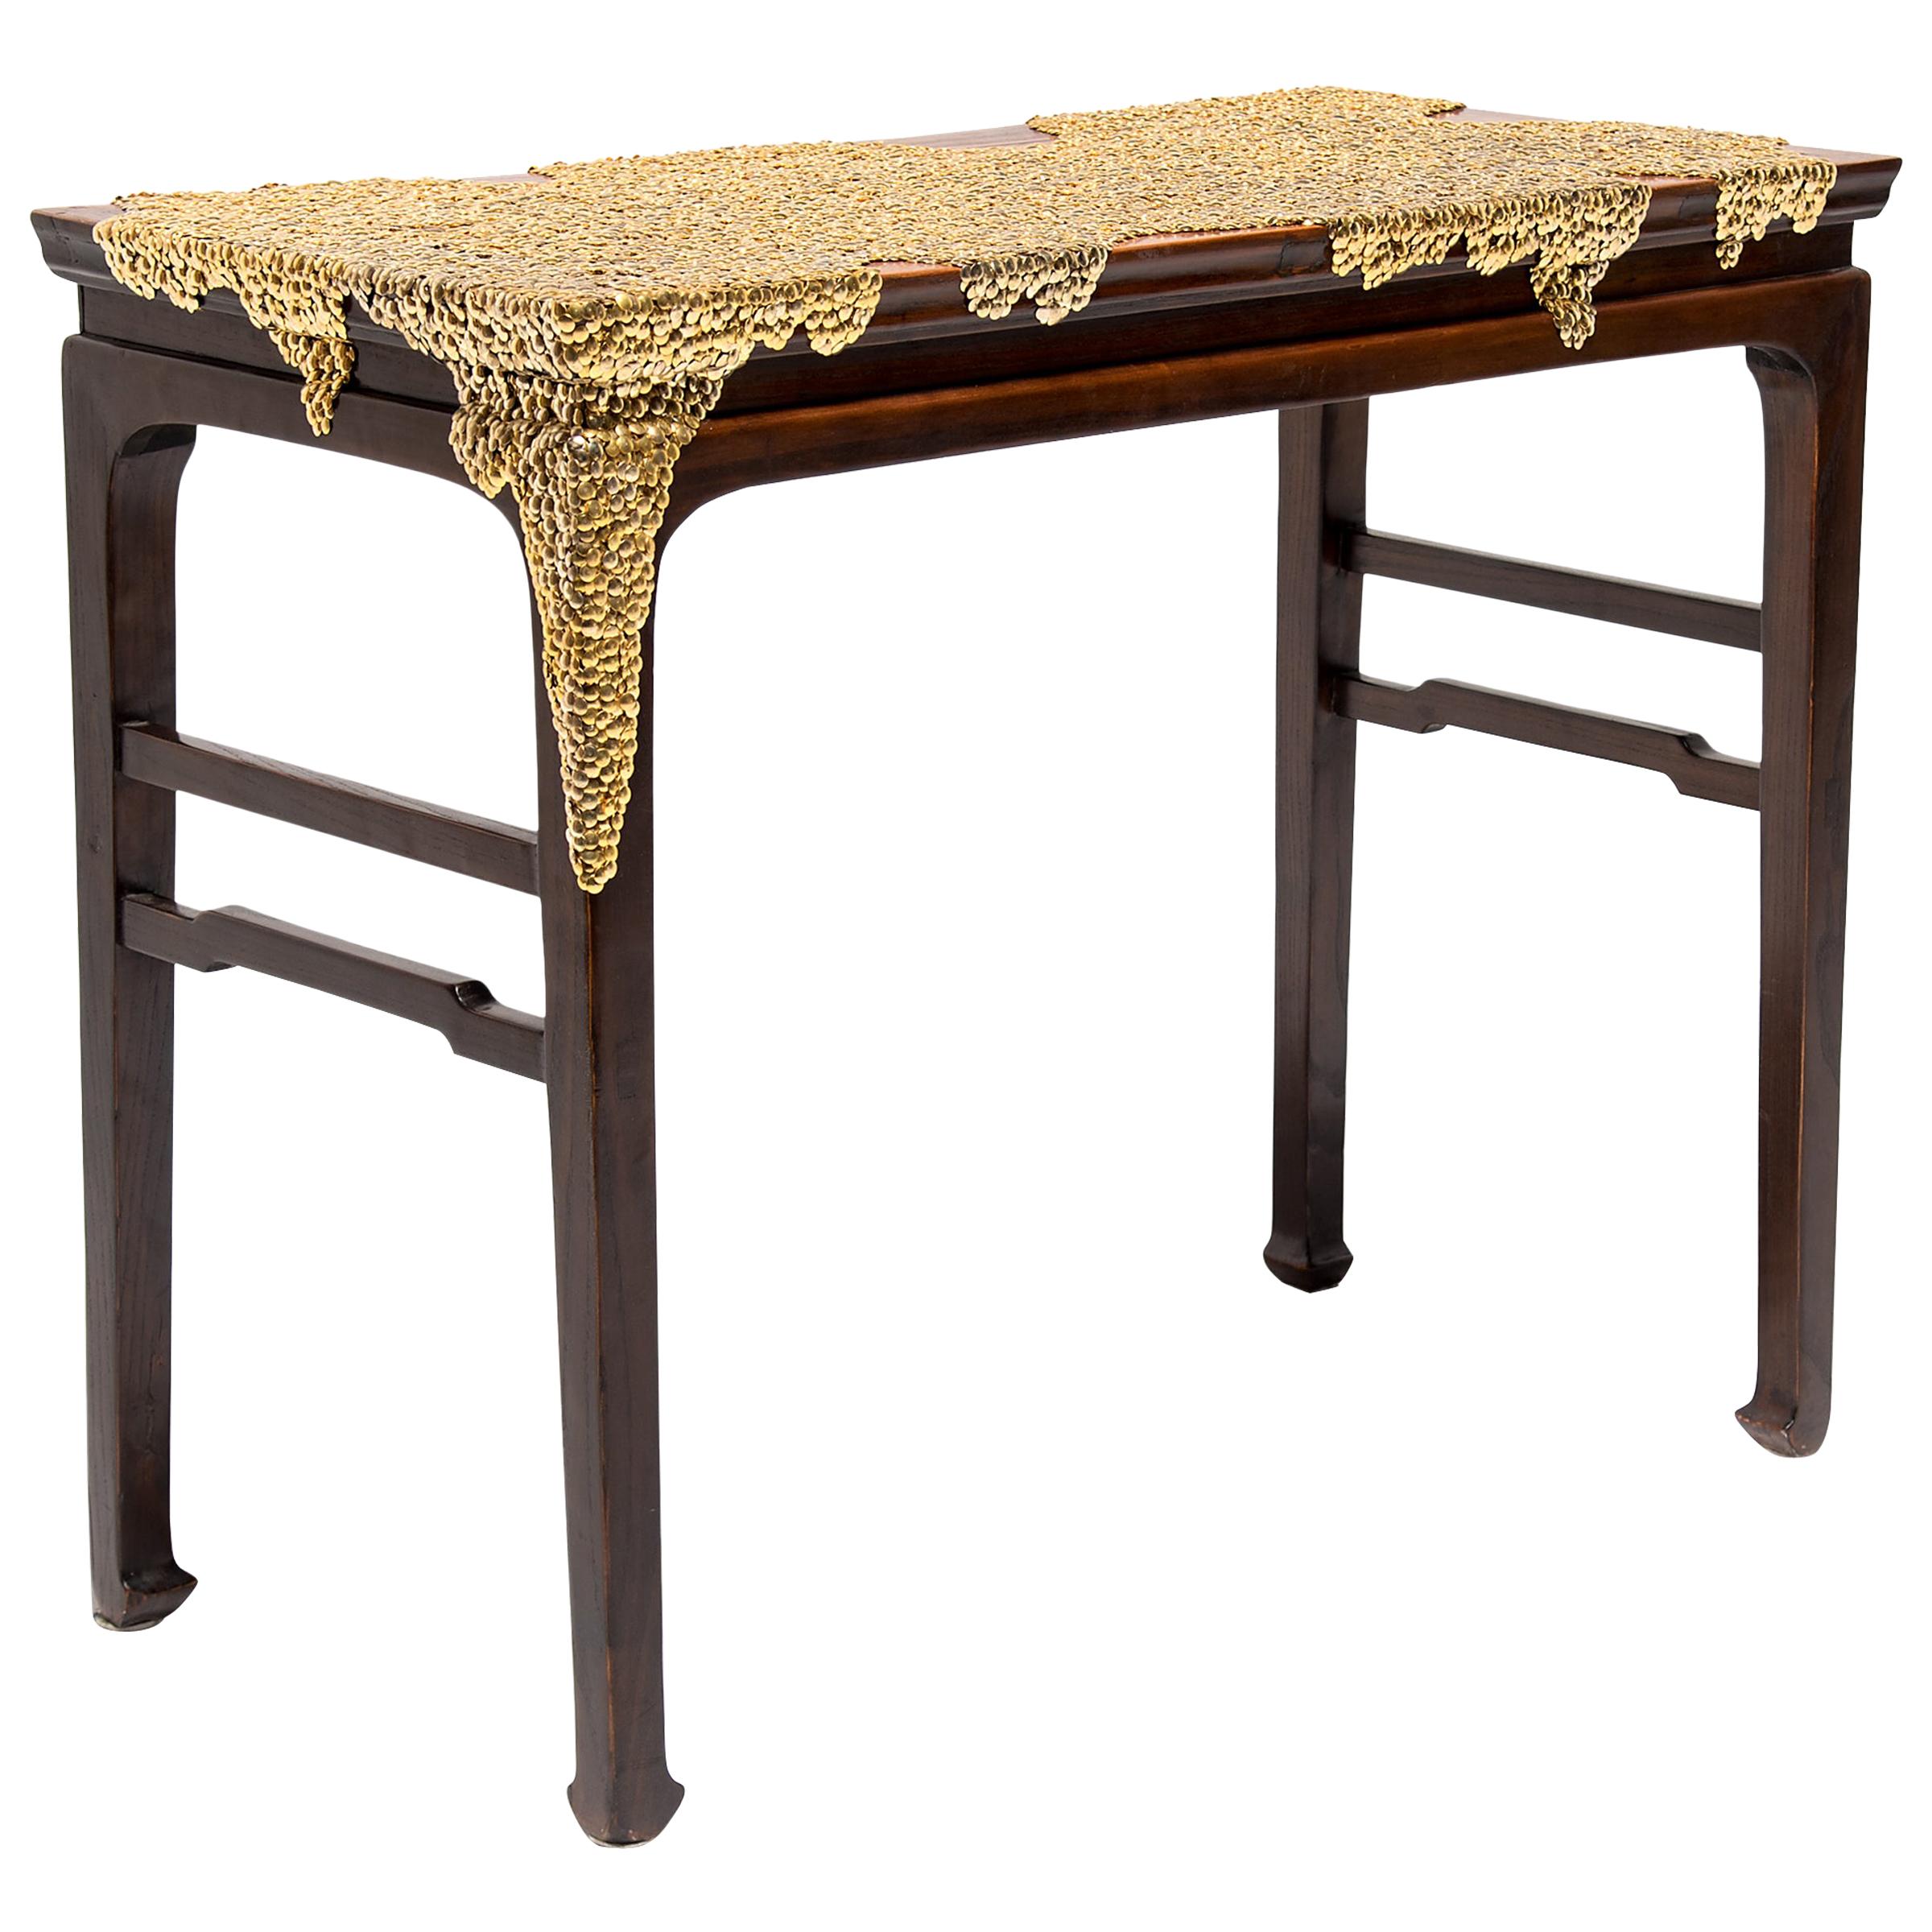 "Flowing" Gold Studded Table by Brian Stanziale For Sale